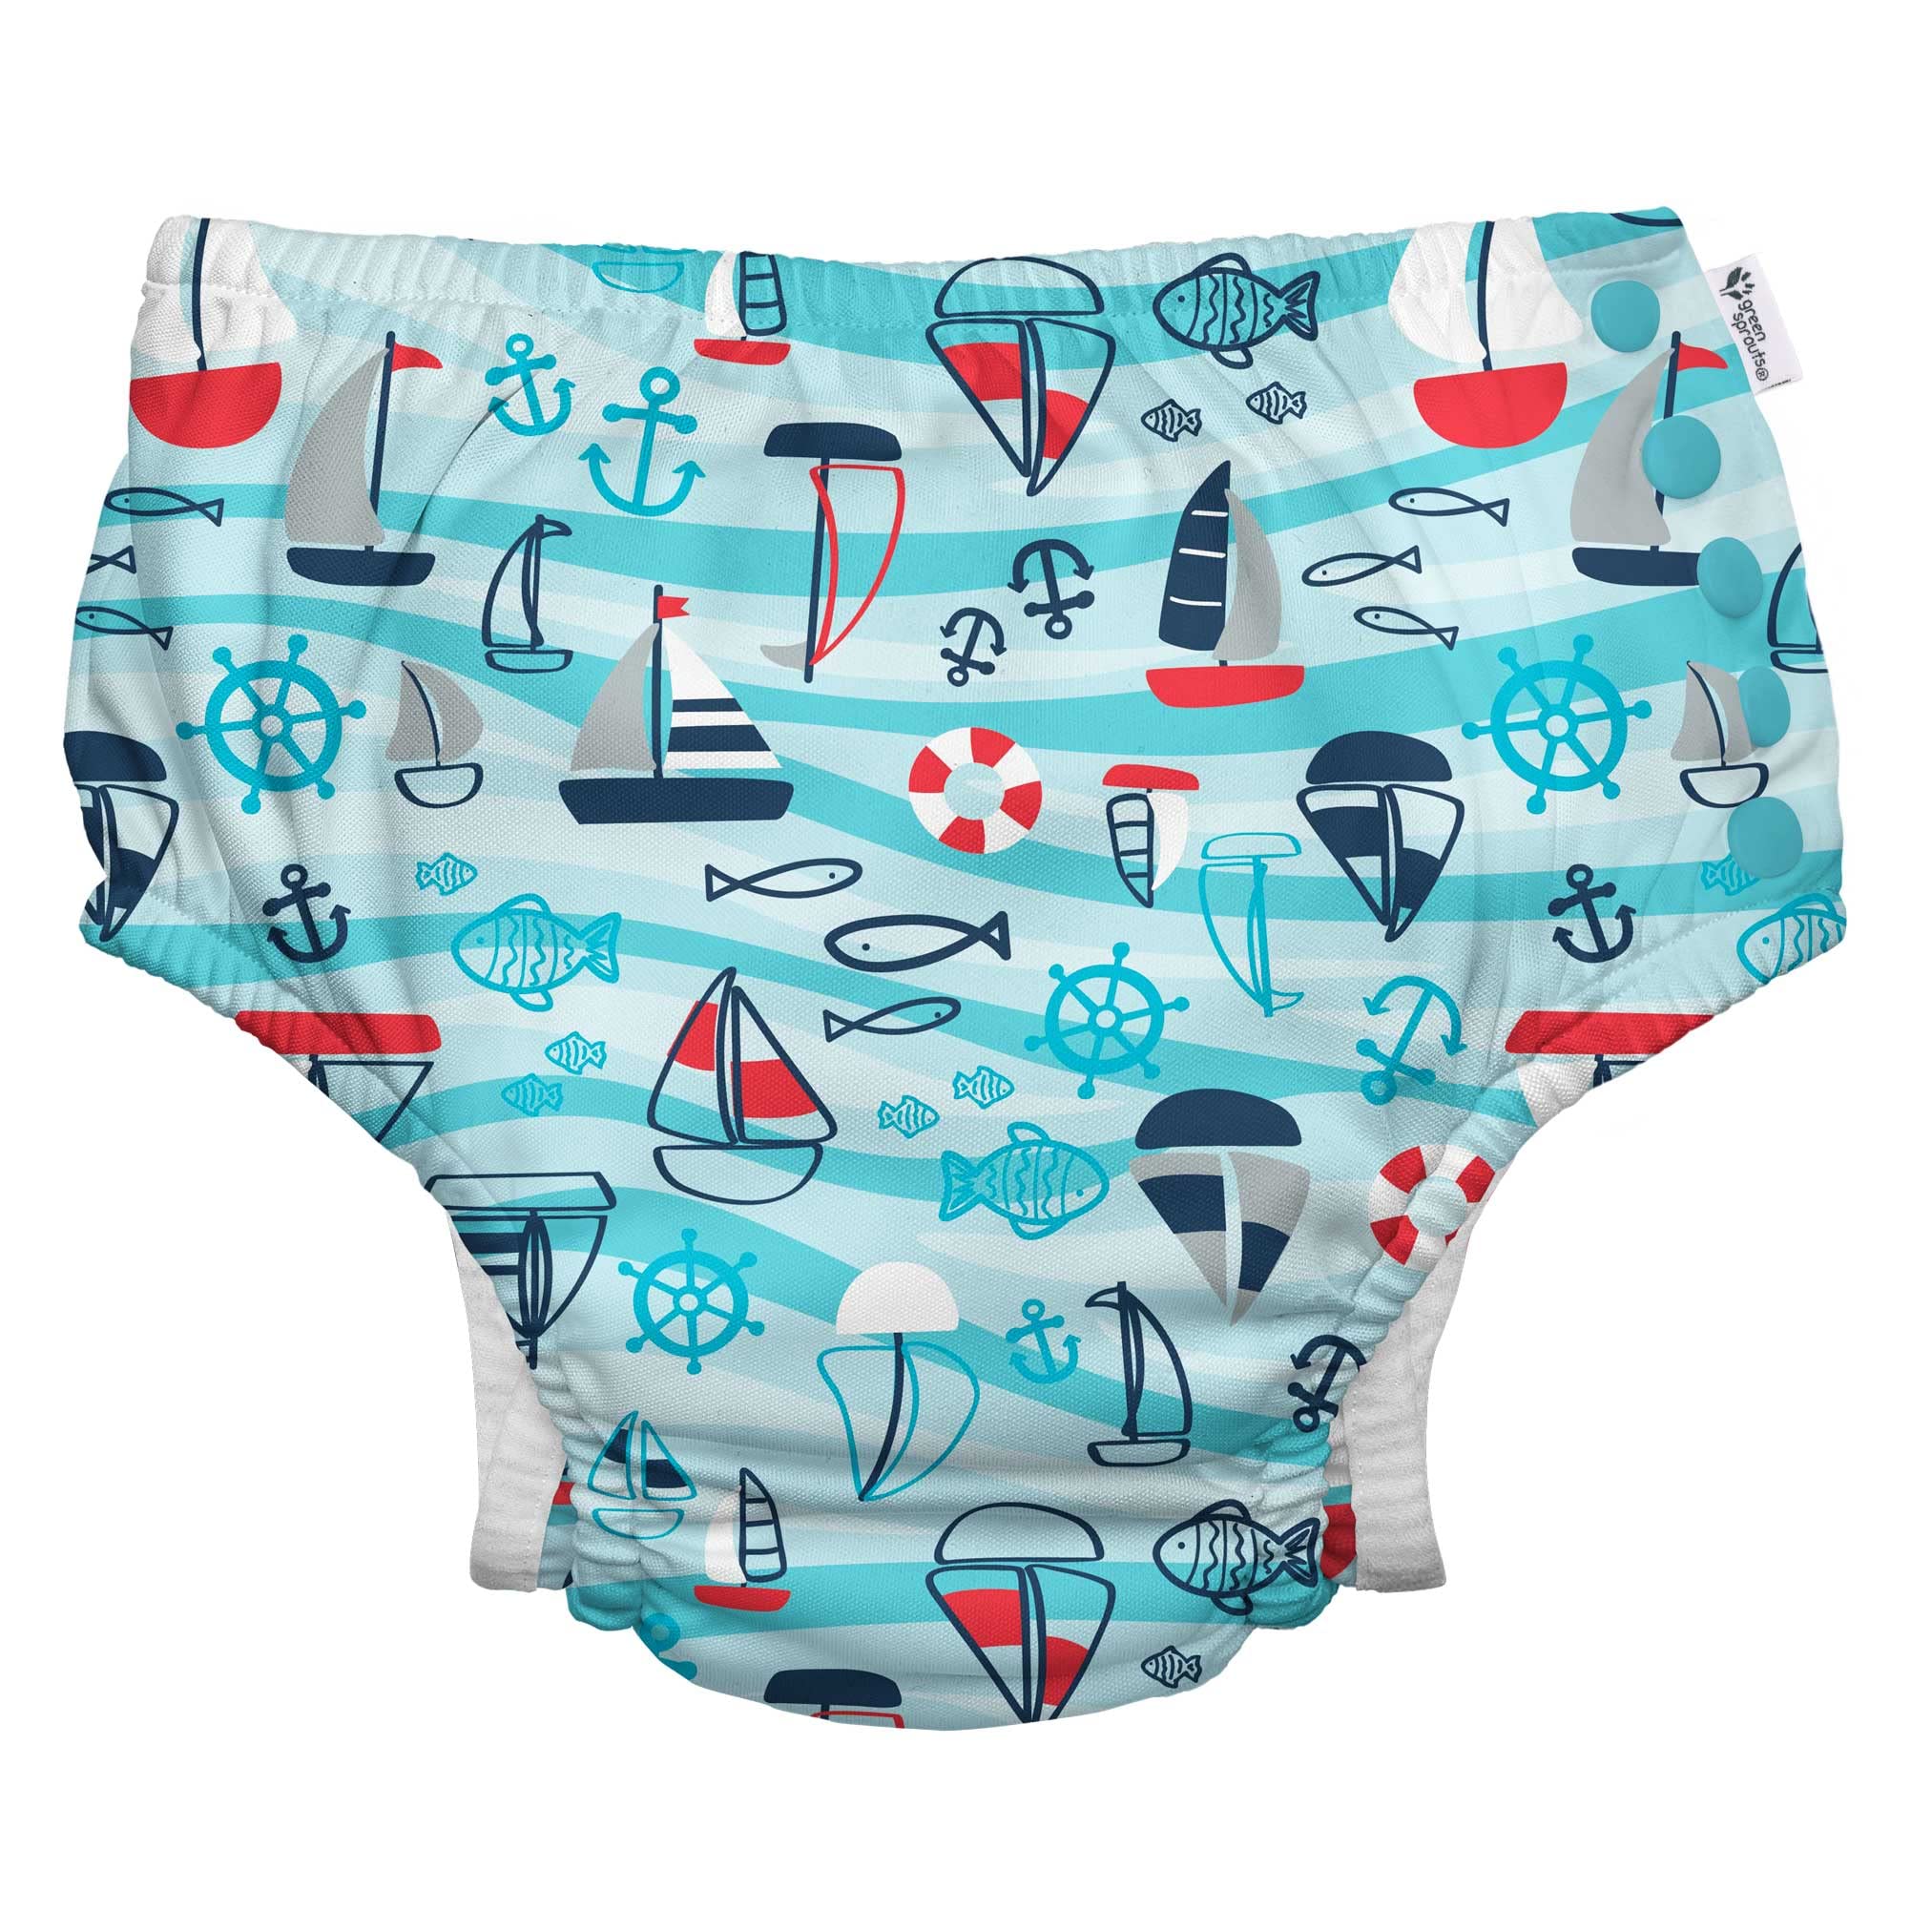 i play. by green sprouts Reusable, Eco Snap Swim Diaper with Gussets, UPF 50, 3T, Aqua Wavy Nautical, Patented Design, STANDARD 100 by OEKO-TEX Certified